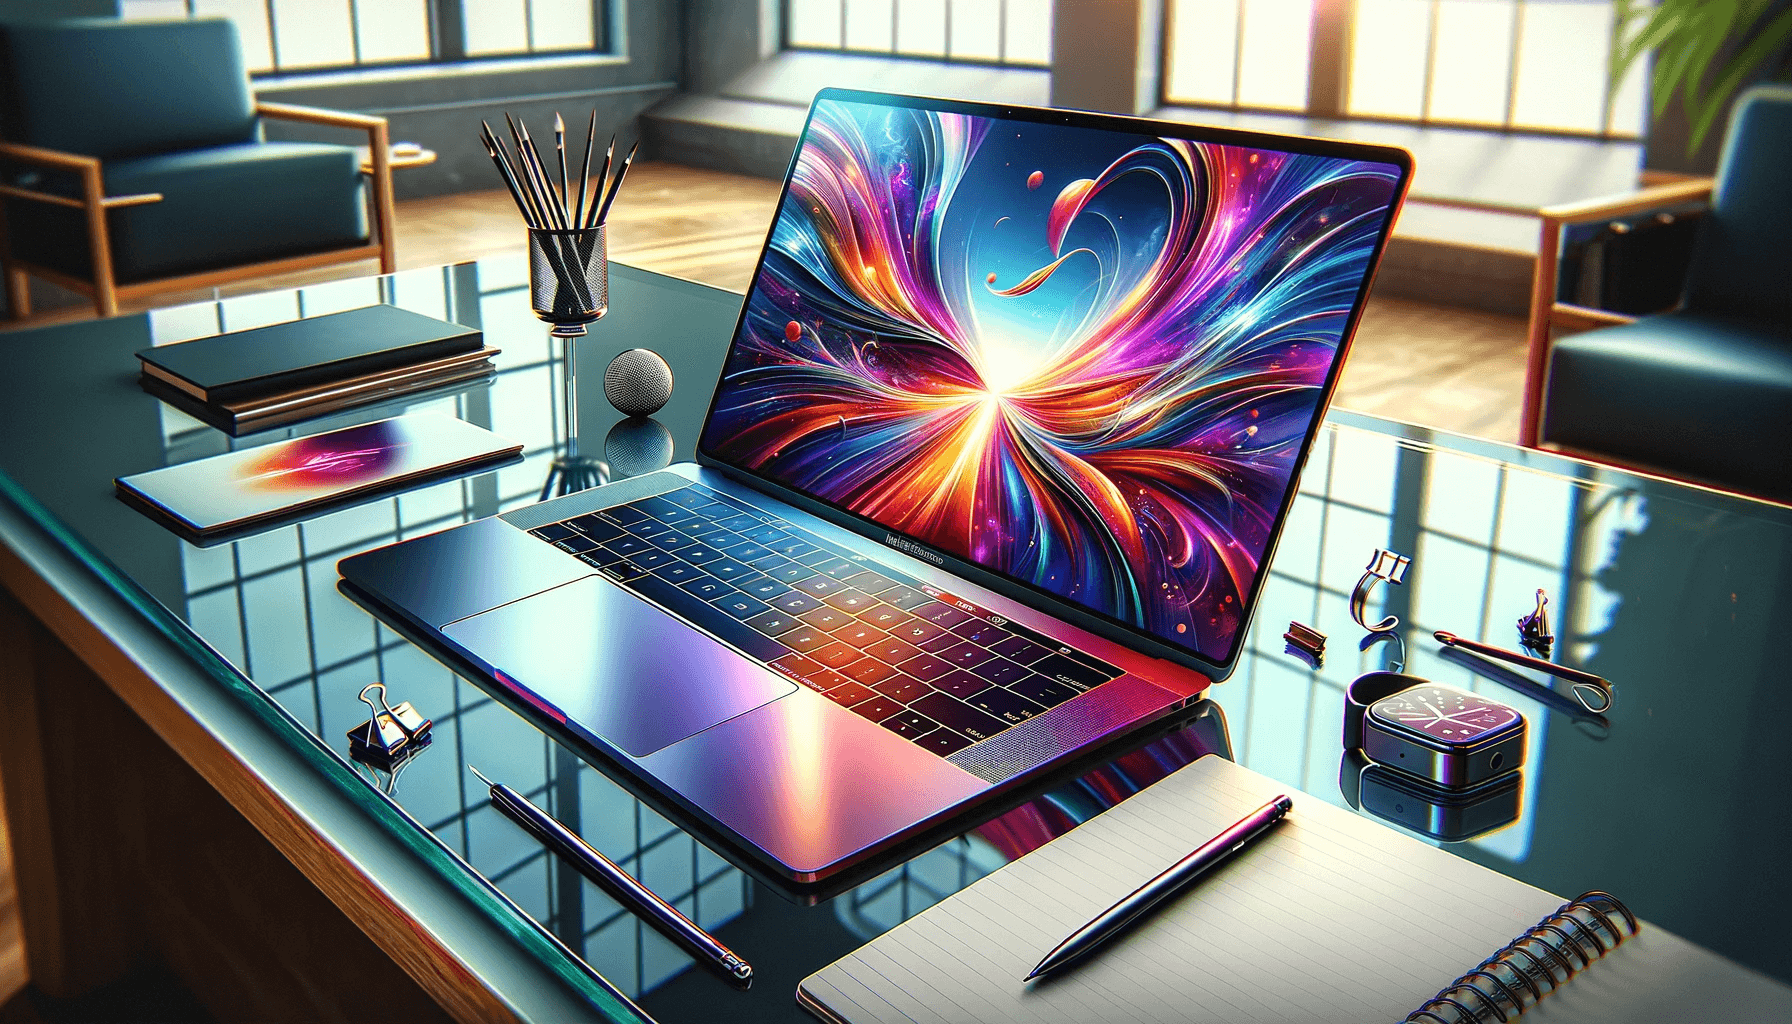 DALL·E 2023 11 21 09.51.31 A stunning digital illustration of a MacBook in a vibrant and artistic style. The MacBook is shown open on a modern glass table displaying its sleek